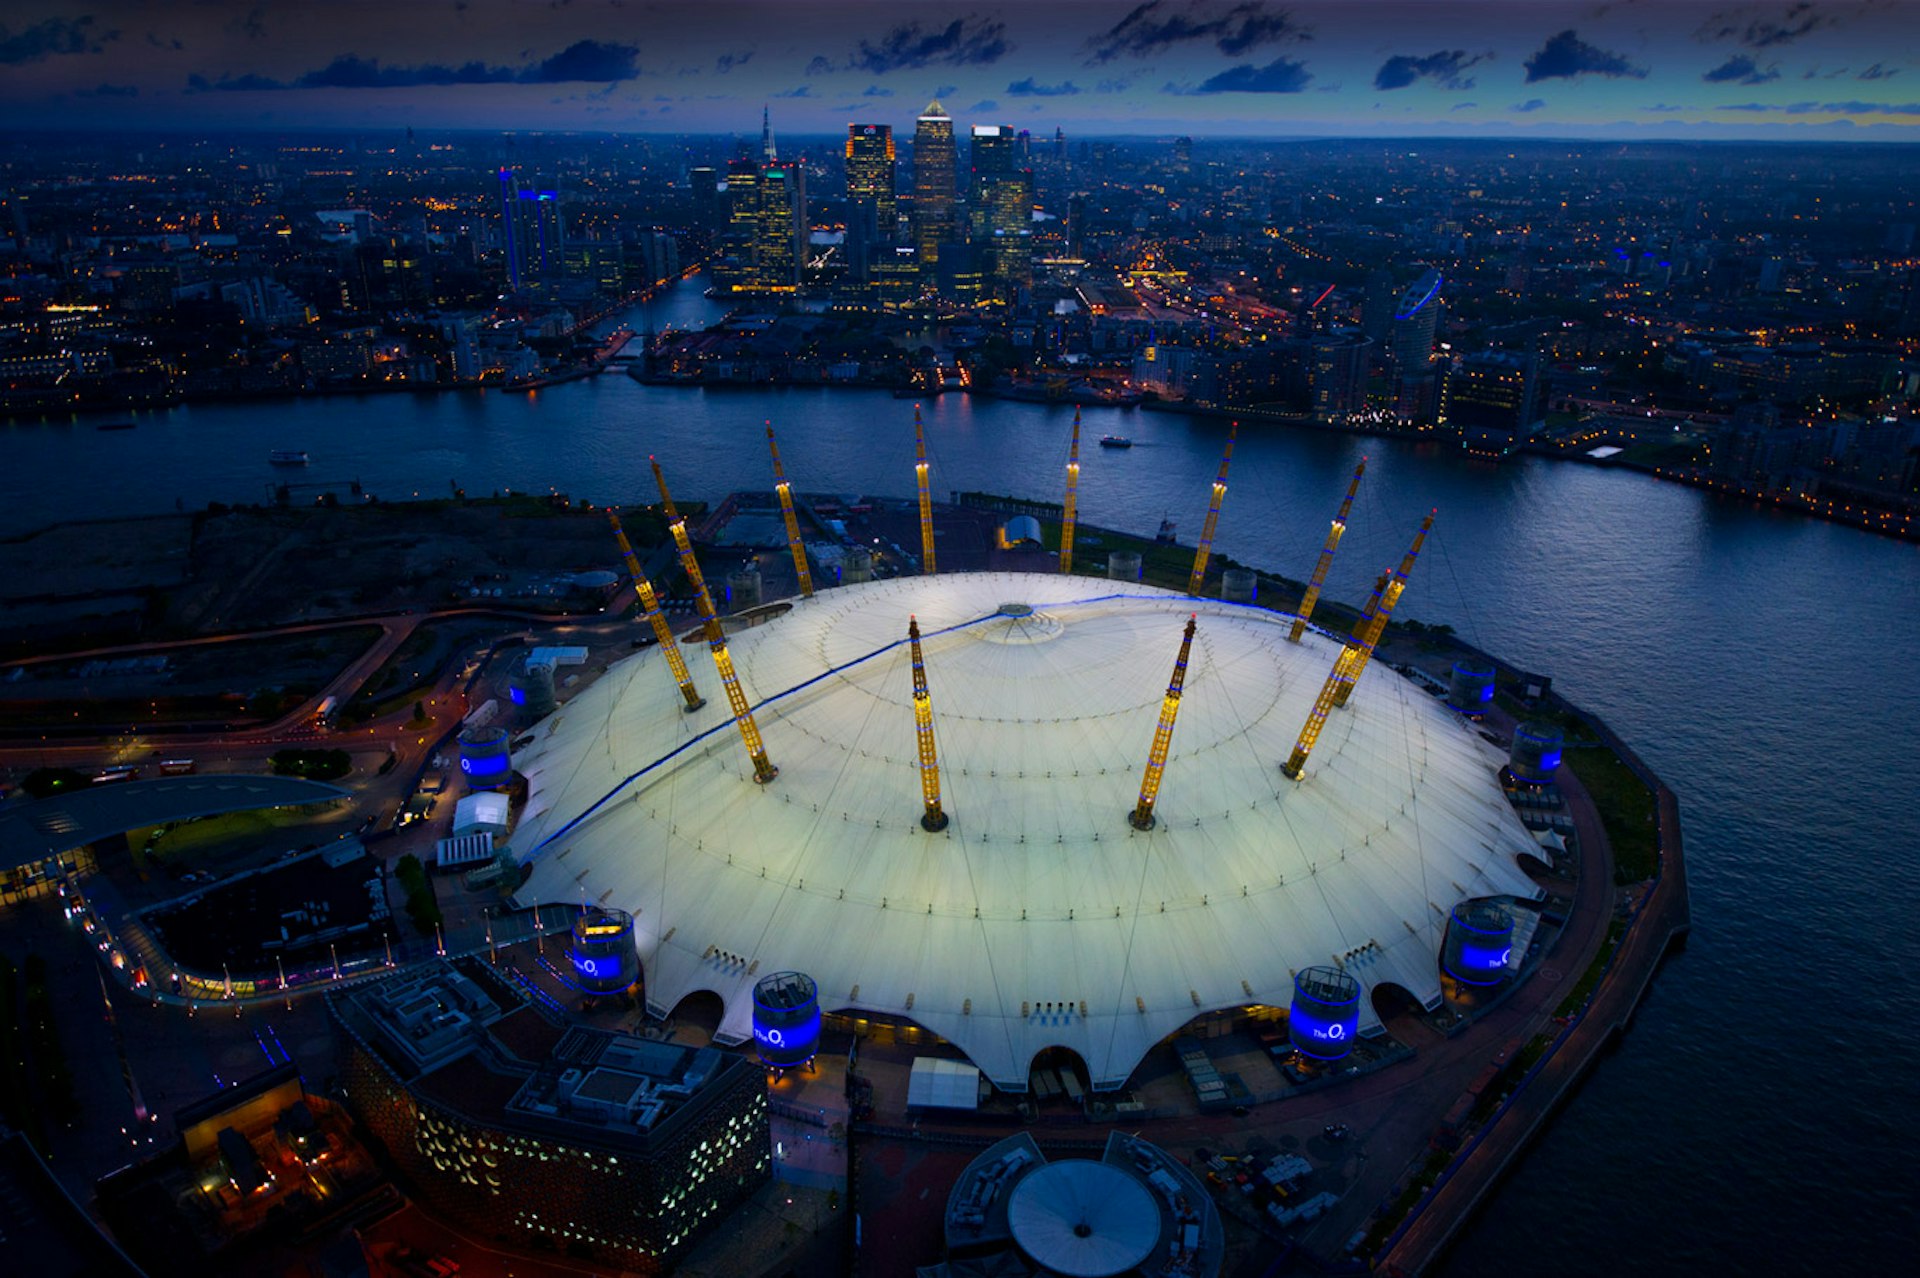 An aerial night-time view over the O2, a huge domed arena next to the River Thames in London.